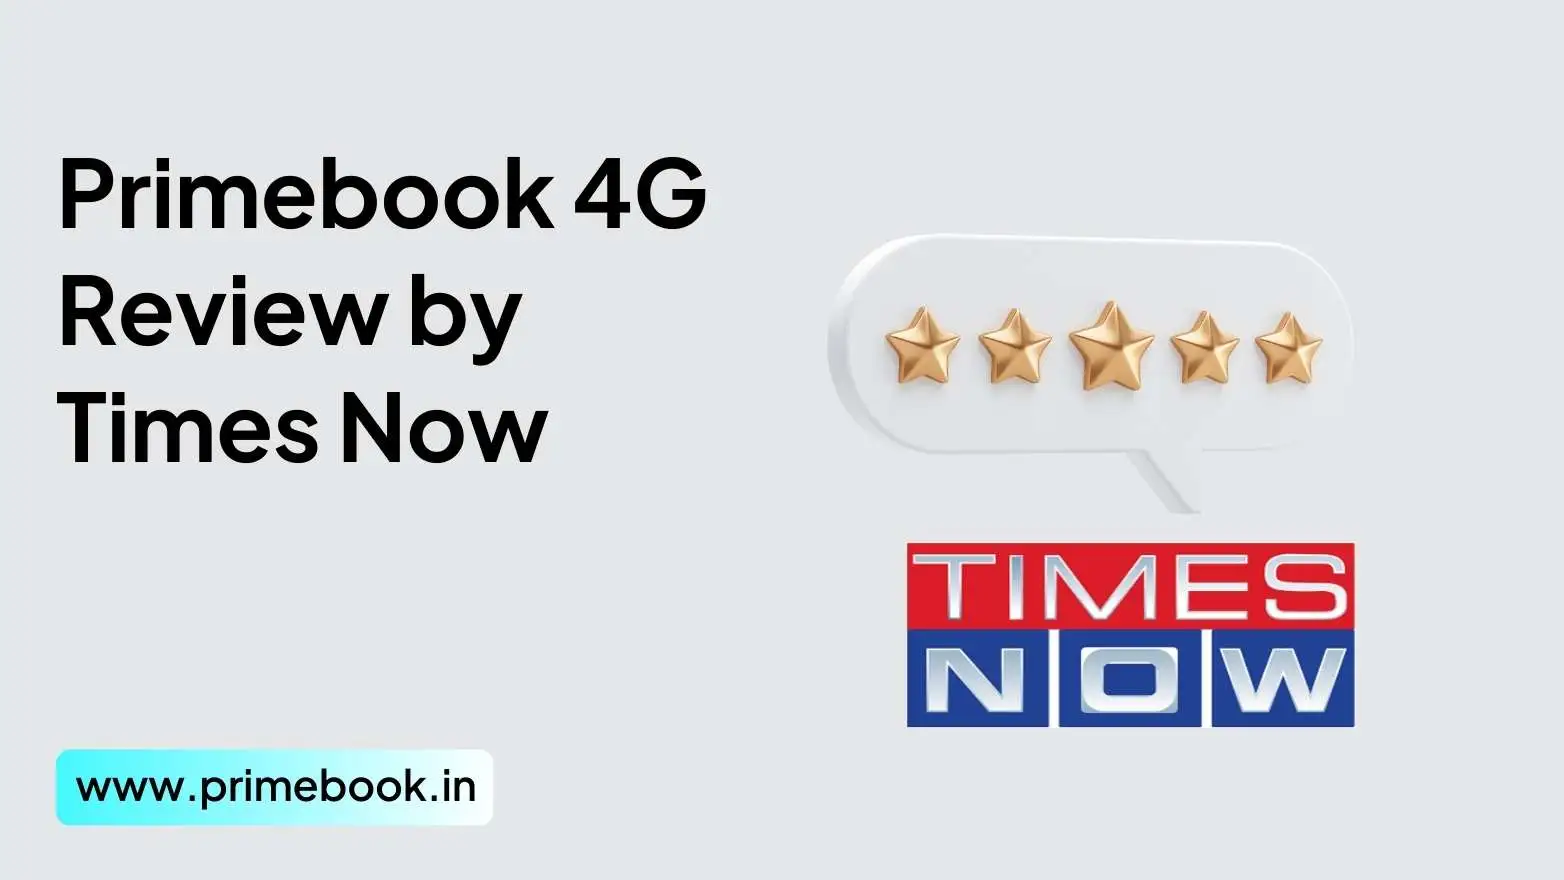 Primebook 4G Review by Times Now